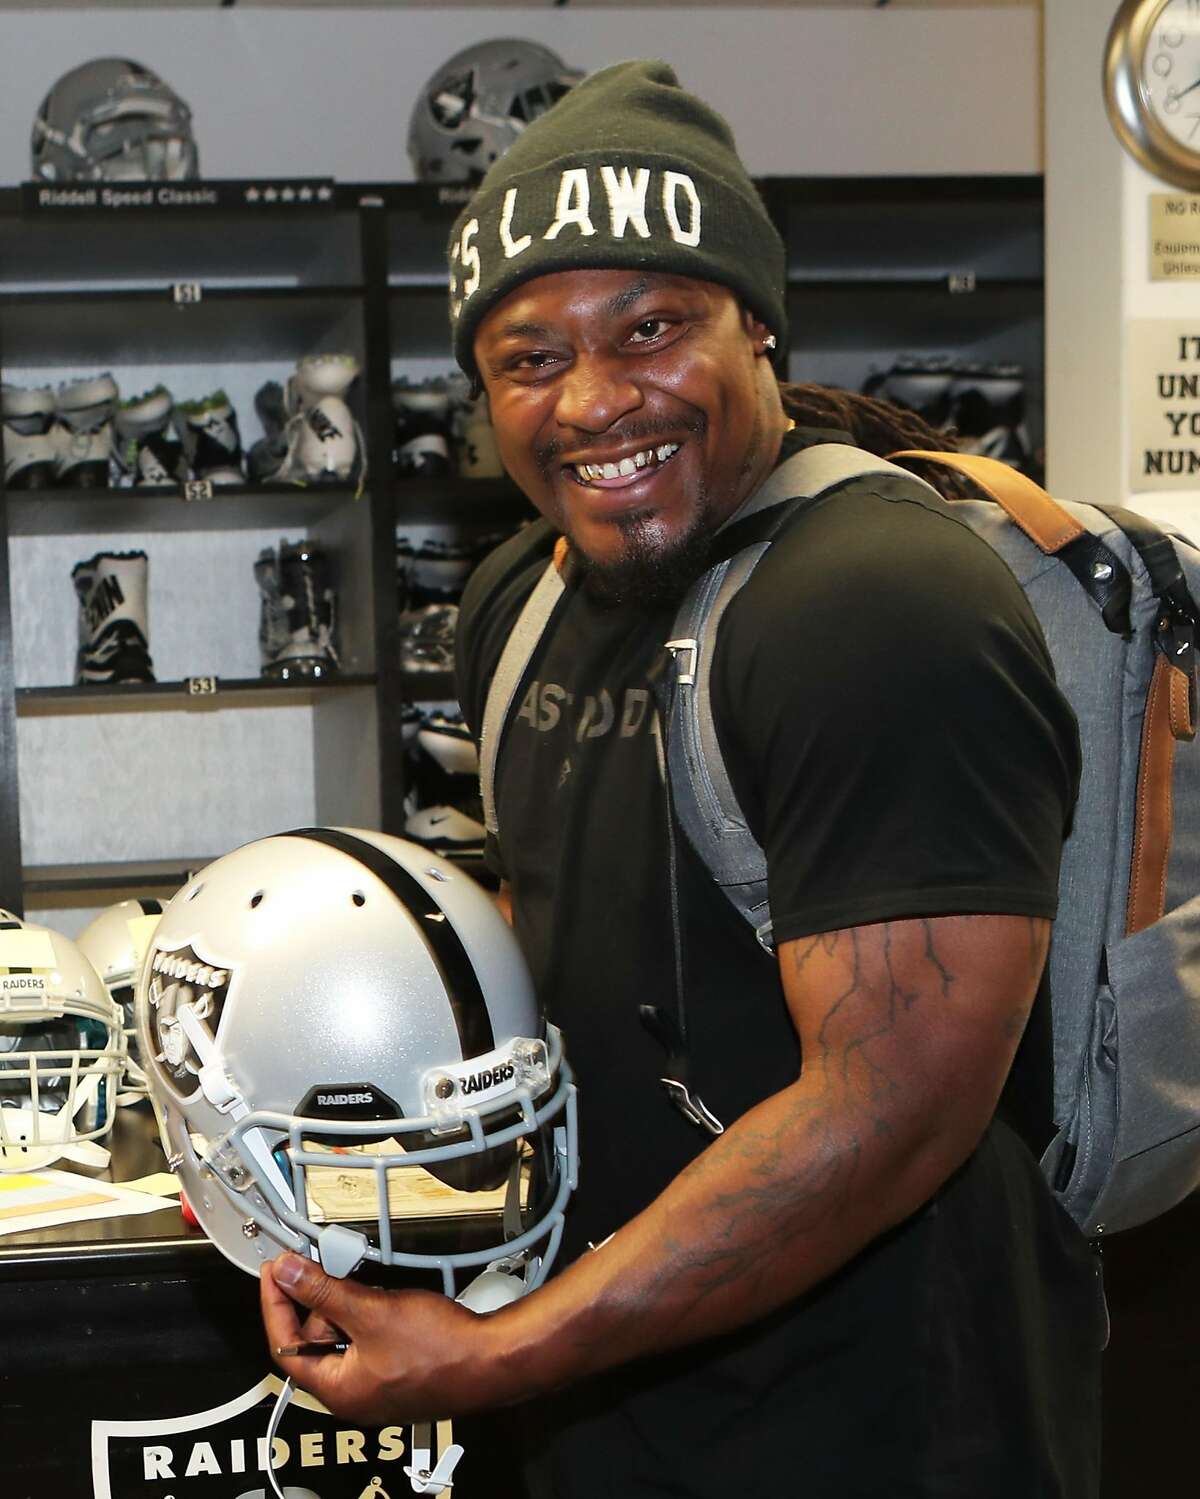 Oakland native and Cal alum Marshawn Lynch was all smiles Wednesday after agreeing to a two-year deal with the Raiders.